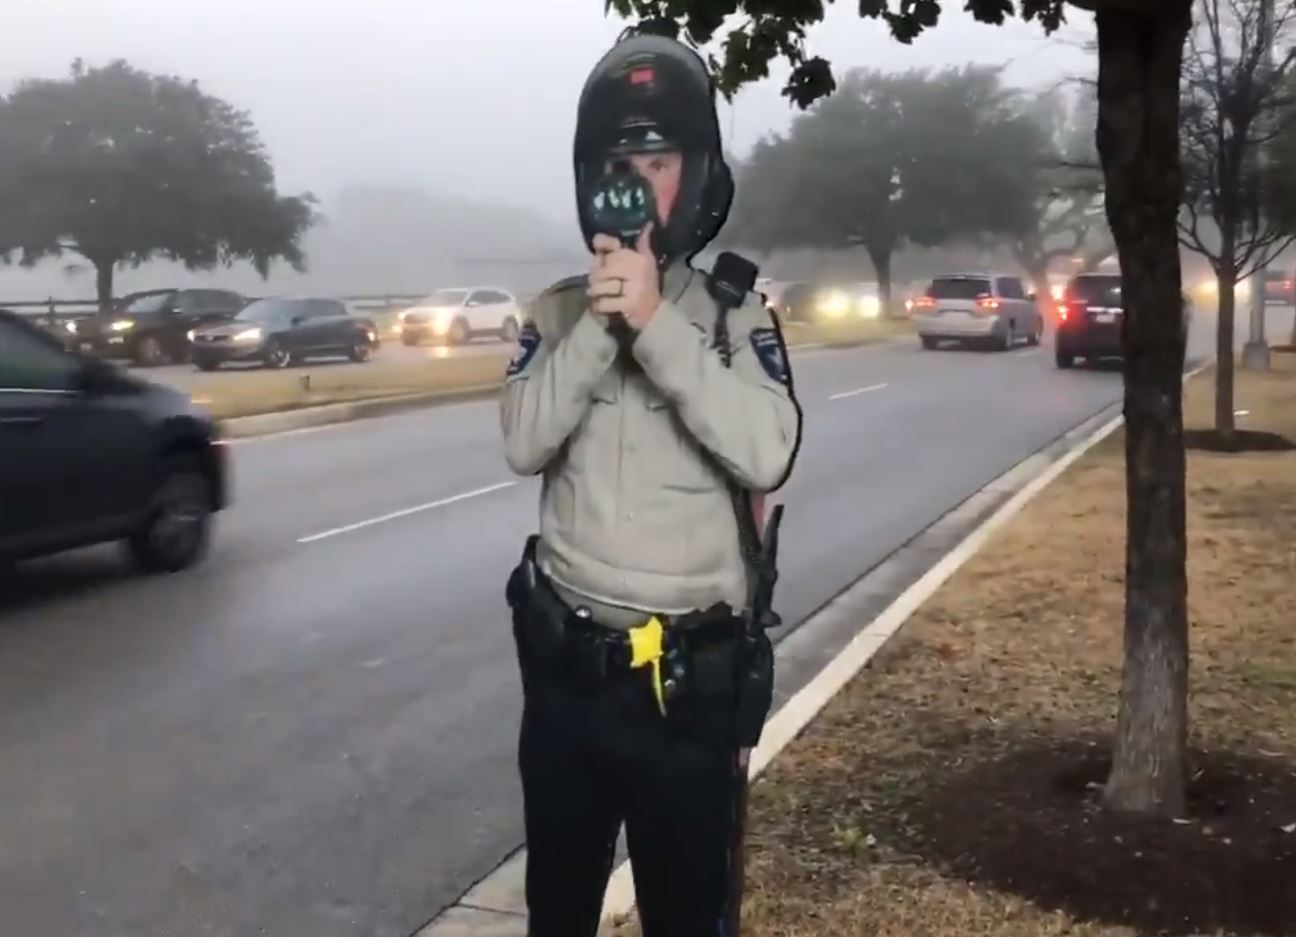 Austin-area county sheriff tries to trick speeders with lifelike signs - Houston Chronicle1296 x 937